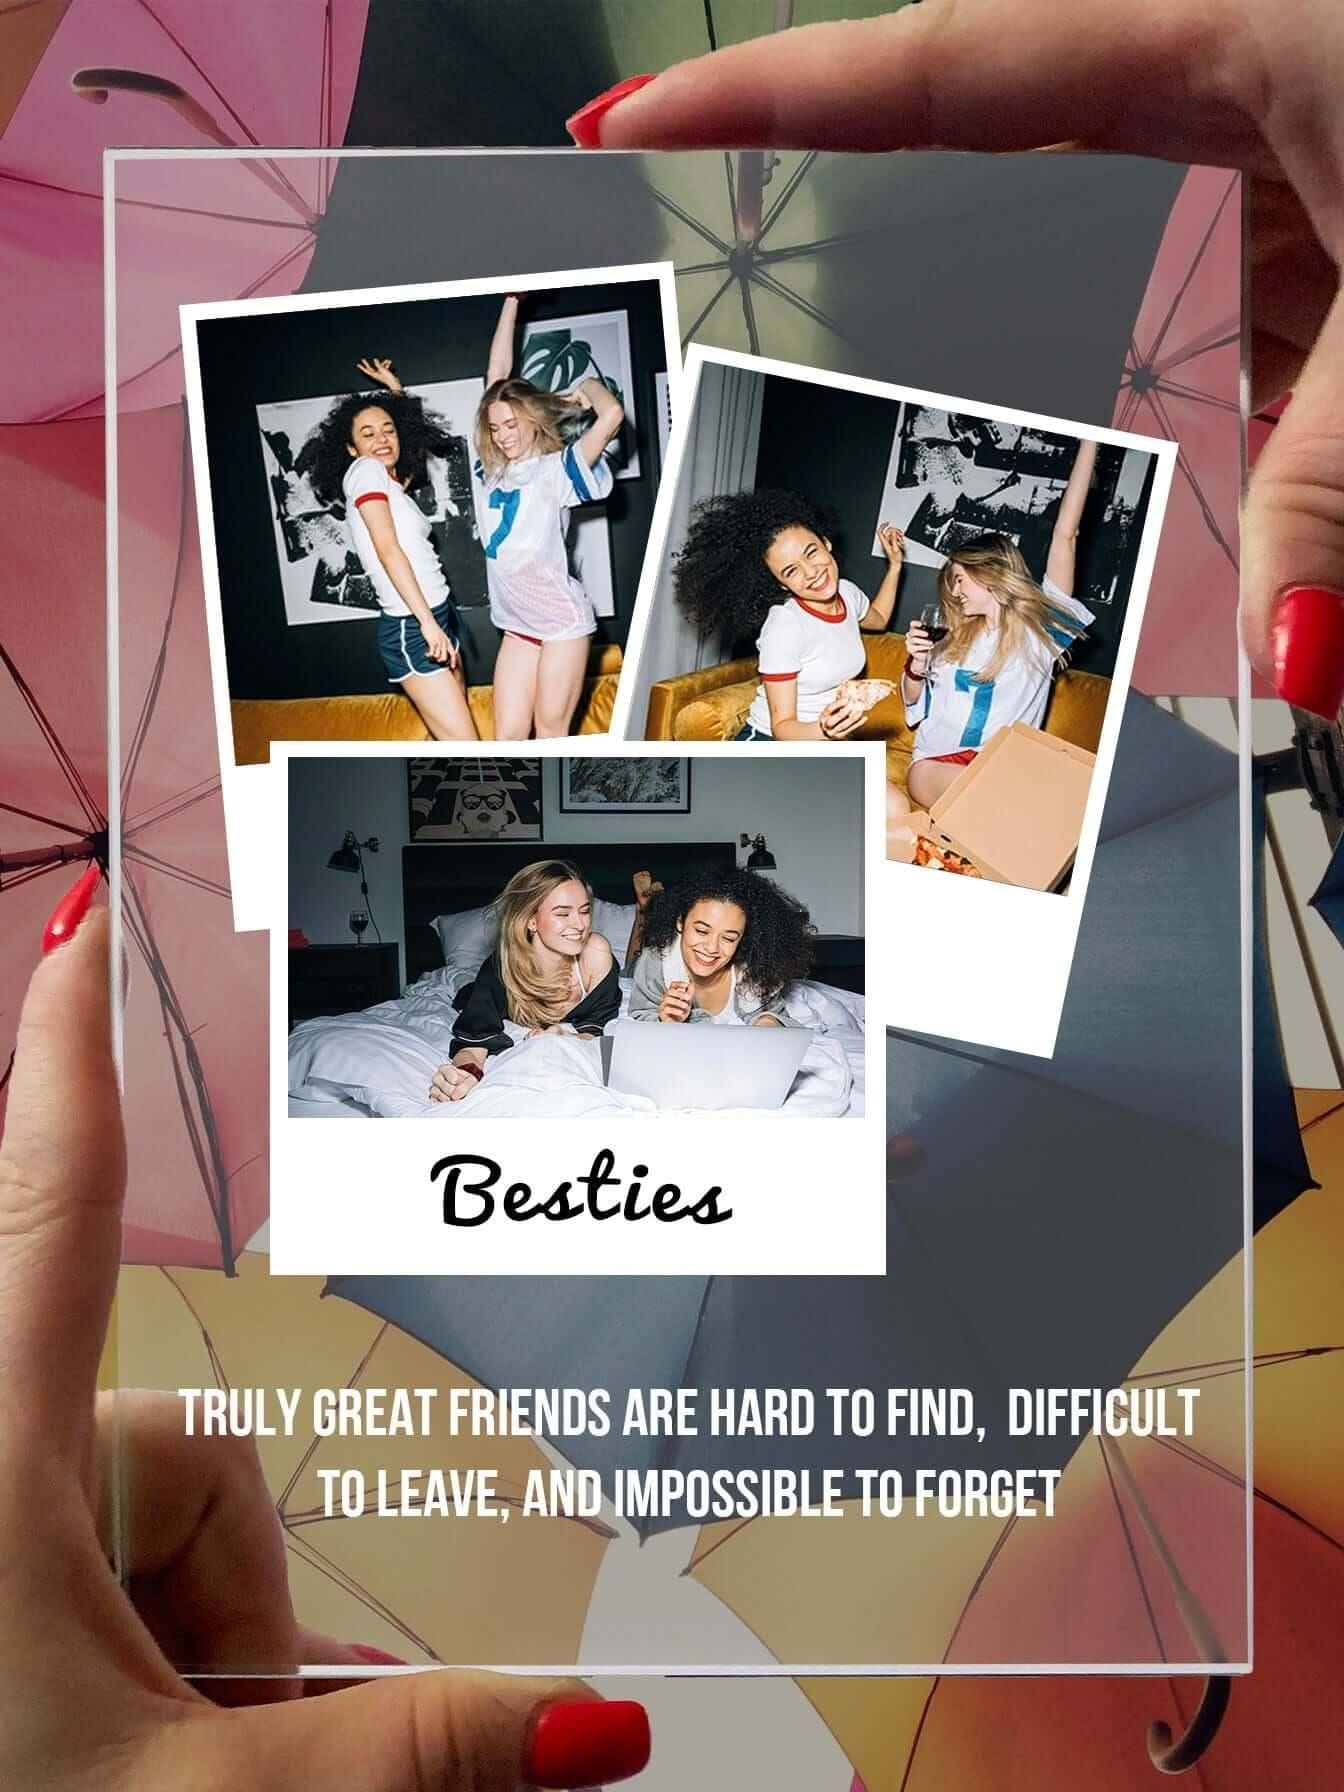 Personalised "Besties" glass poster-Personalised "Besties" template, high quality printed on the glass. These make the perfect gift. Order yours now 👉 sogifts.eu-black, friendship, glass poster, new, white-Personalized products-sogifts.eu